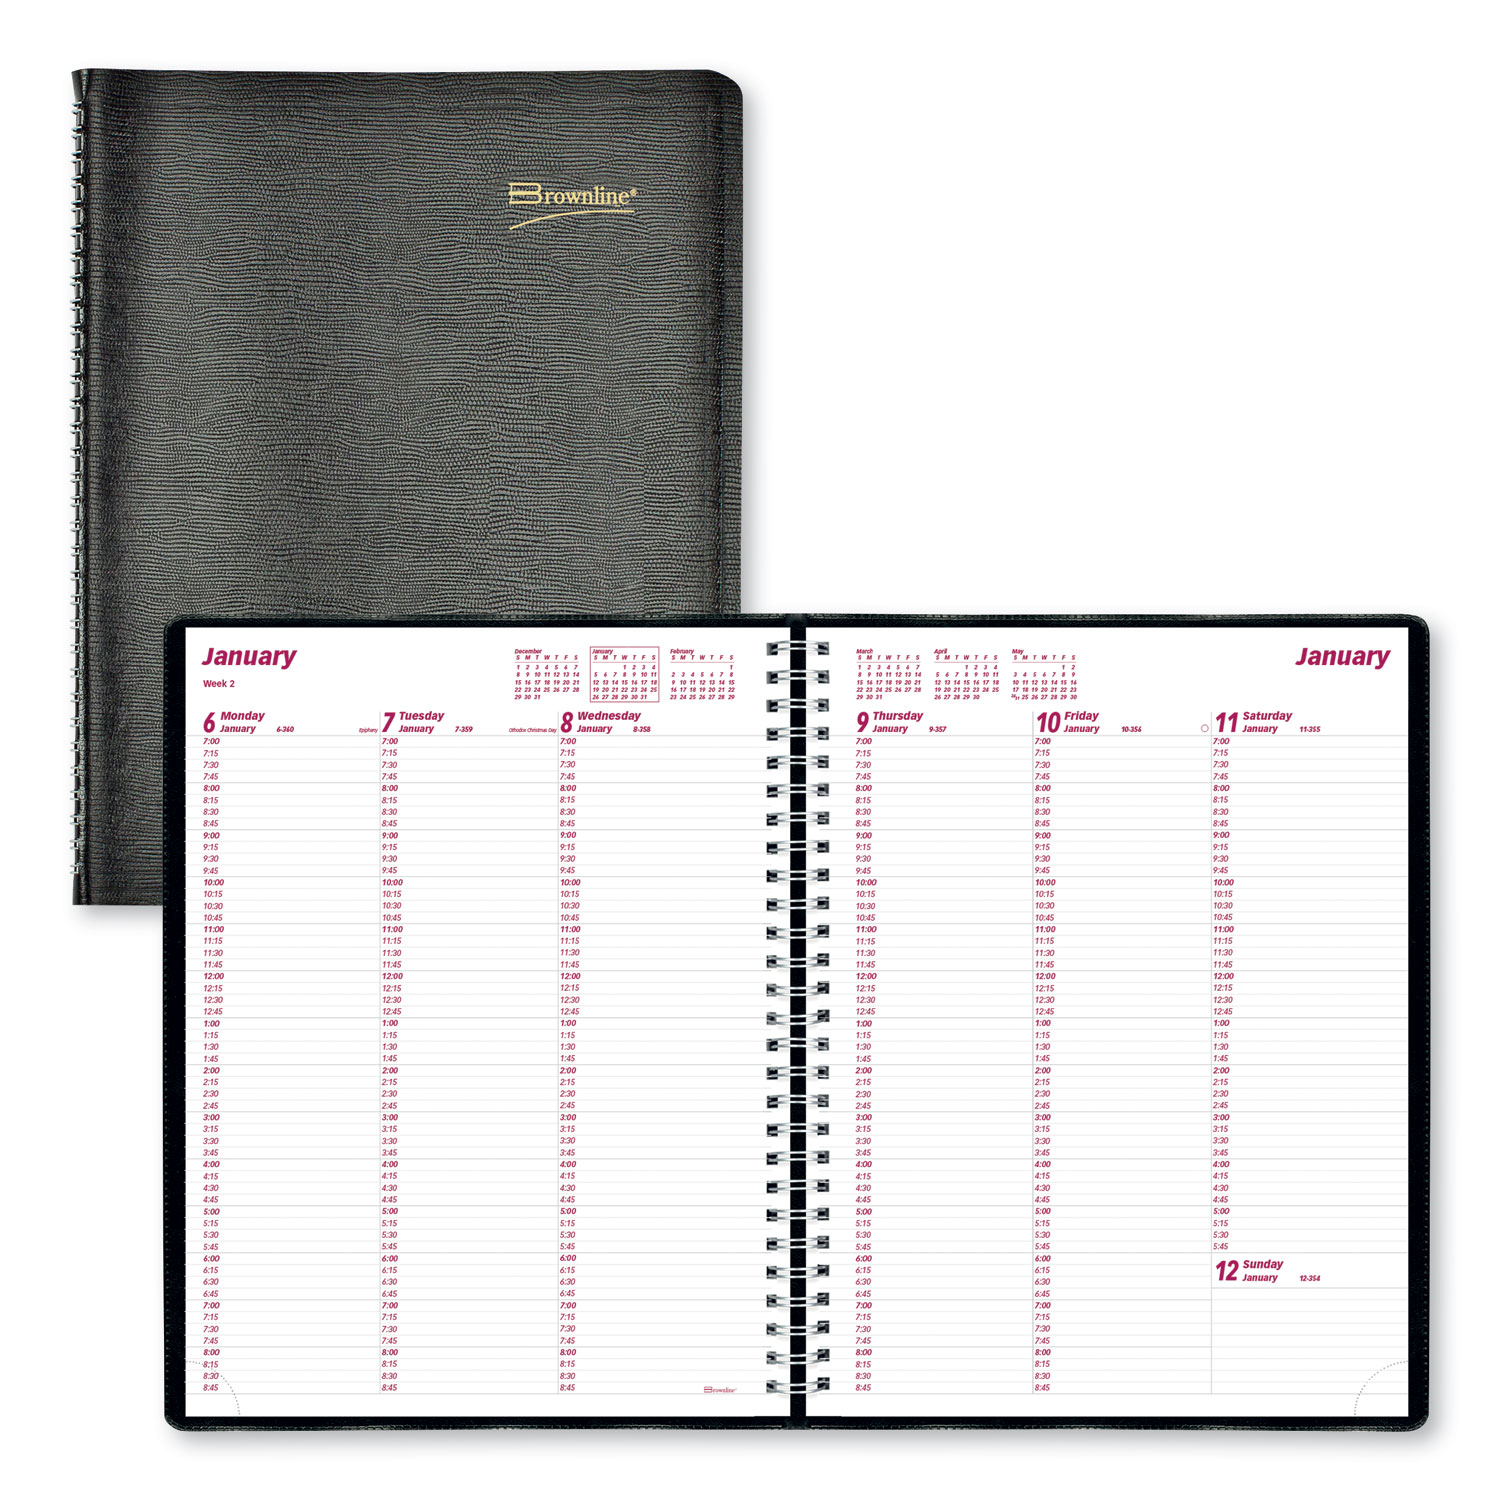  Brownline CB950.BLK Essential Collection Weekly Appointment Book, 11 x 8 1/2, Black, 2020 (REDCB950BLK) 